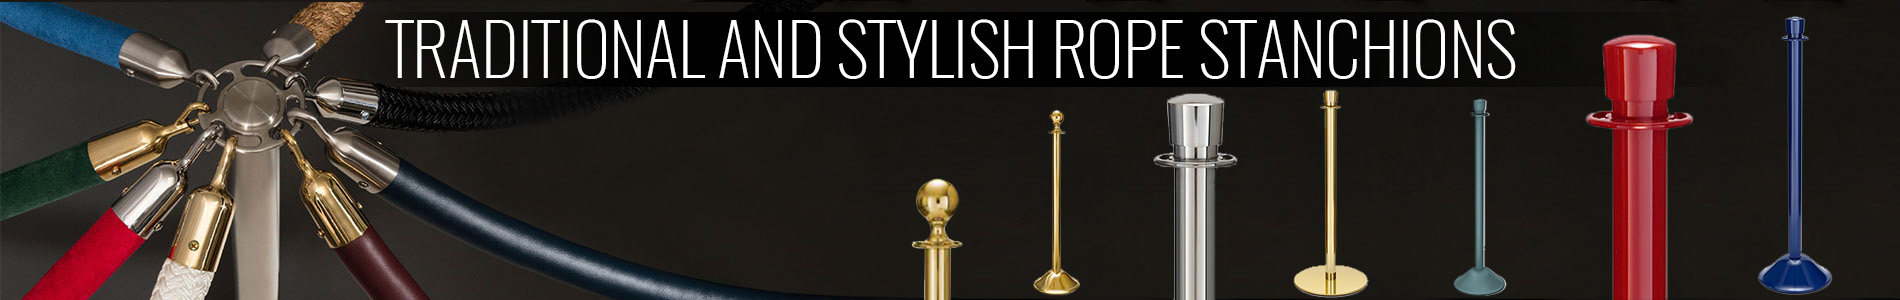 traditional-and-stylish-rope-stanchions